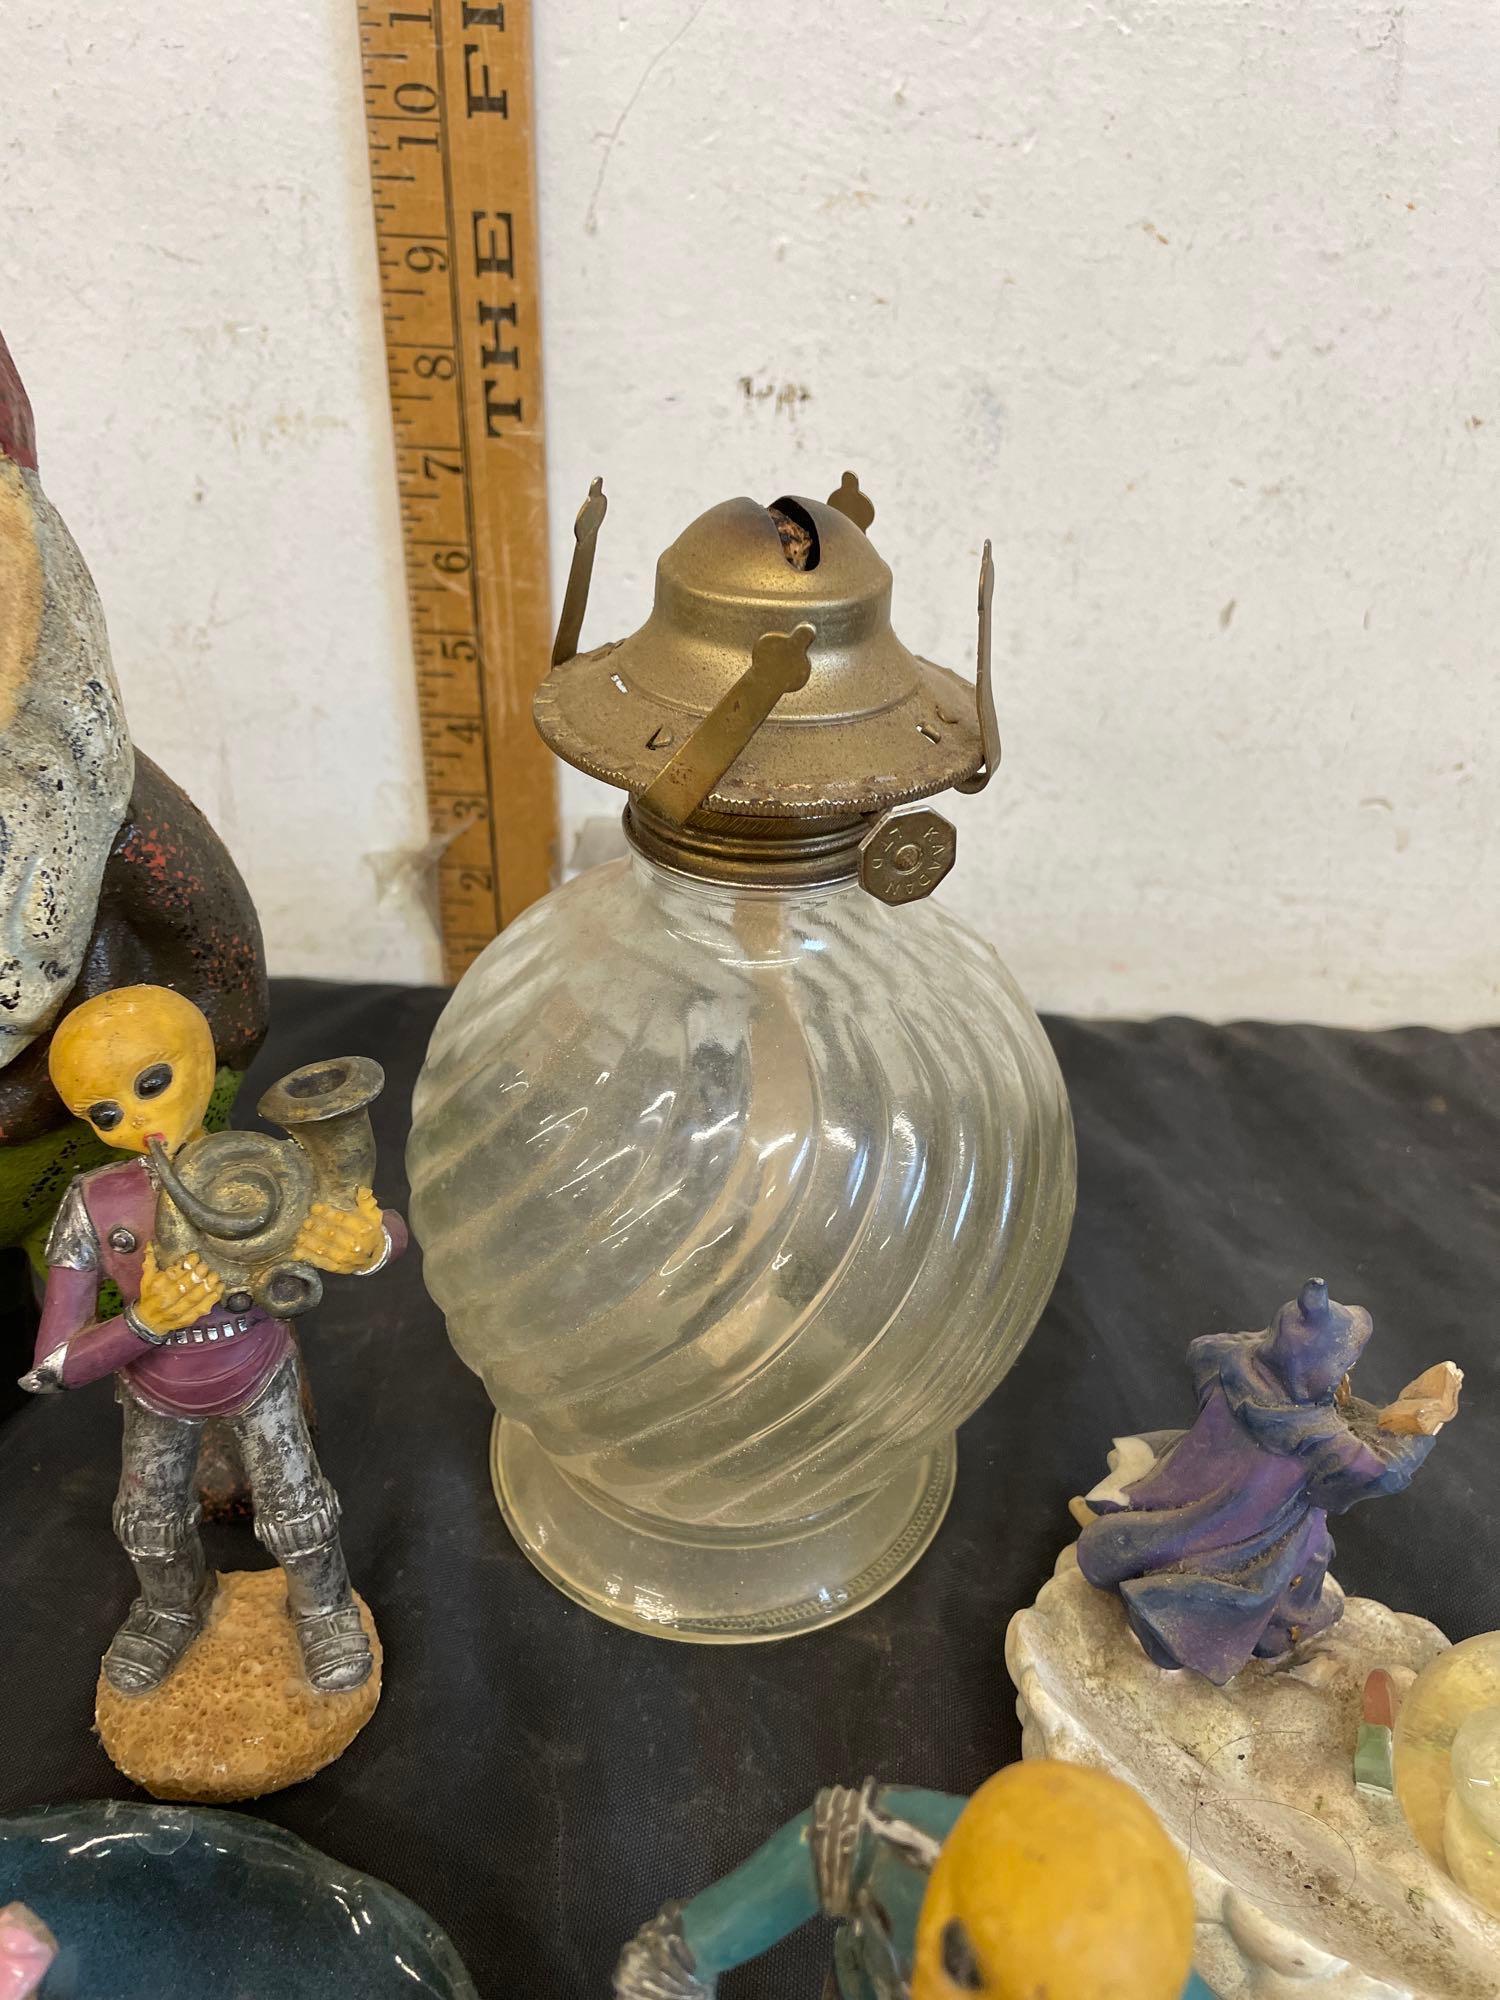 Oil lamp, Statues and More